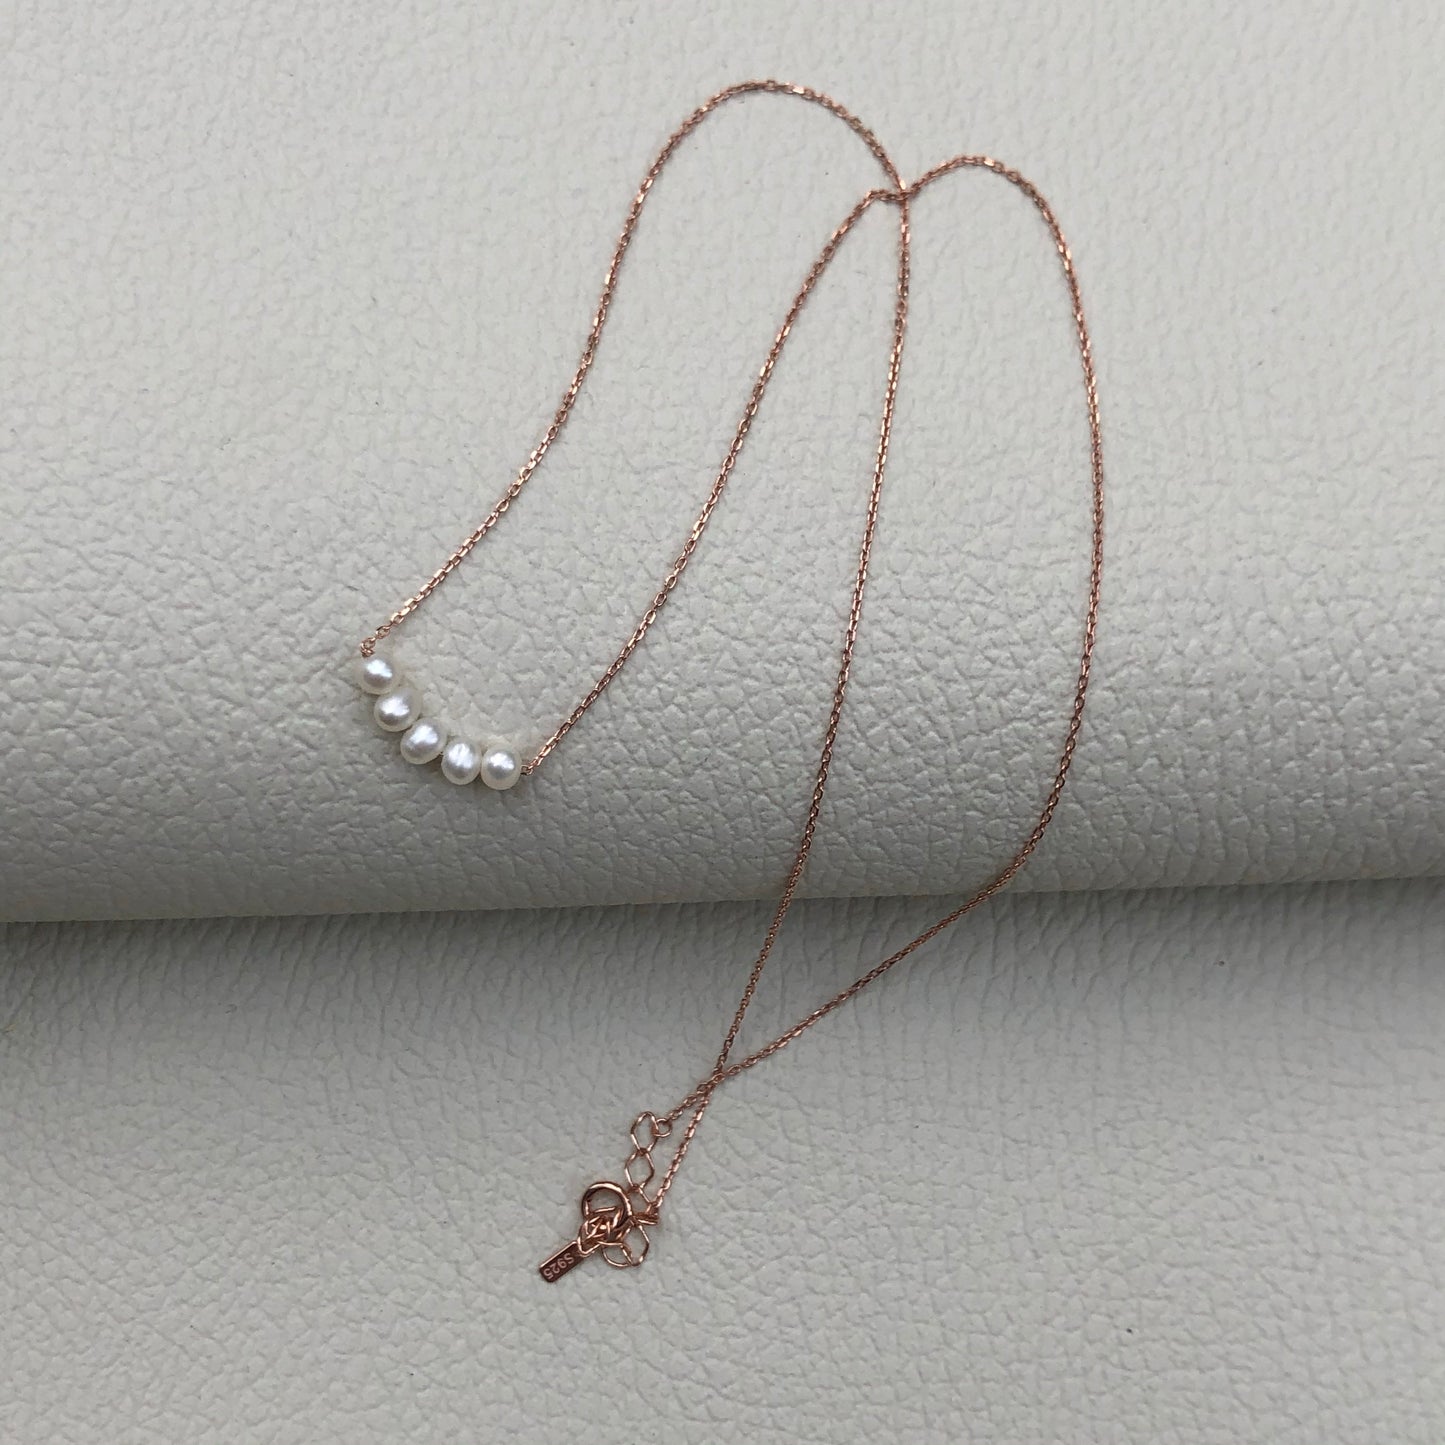 Tricia Pearl Necklace in Rose Gold